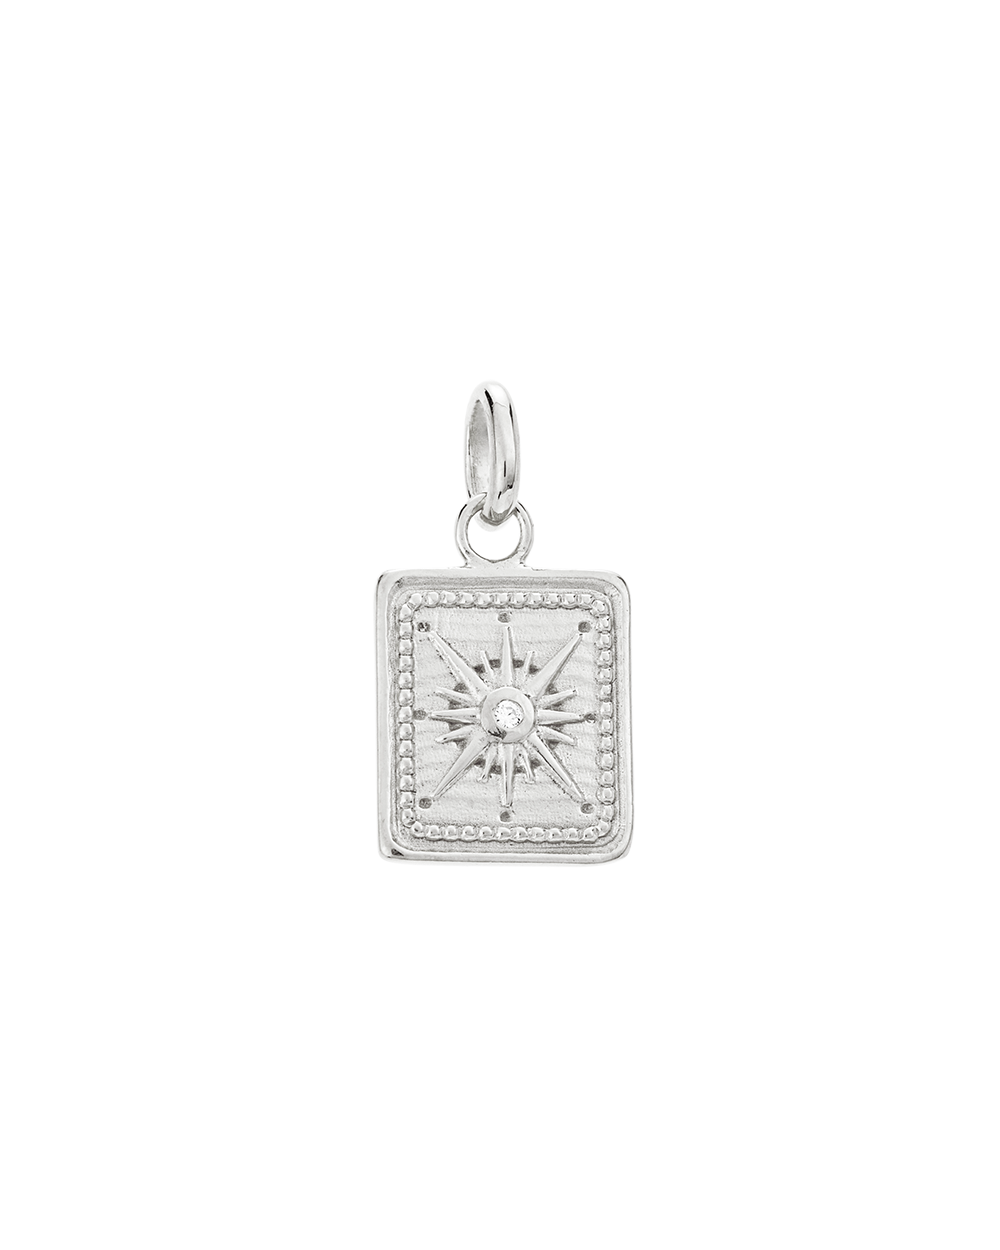 TINY TRUE NORTH COIN (STERLING SILVER) - IMAGE 1